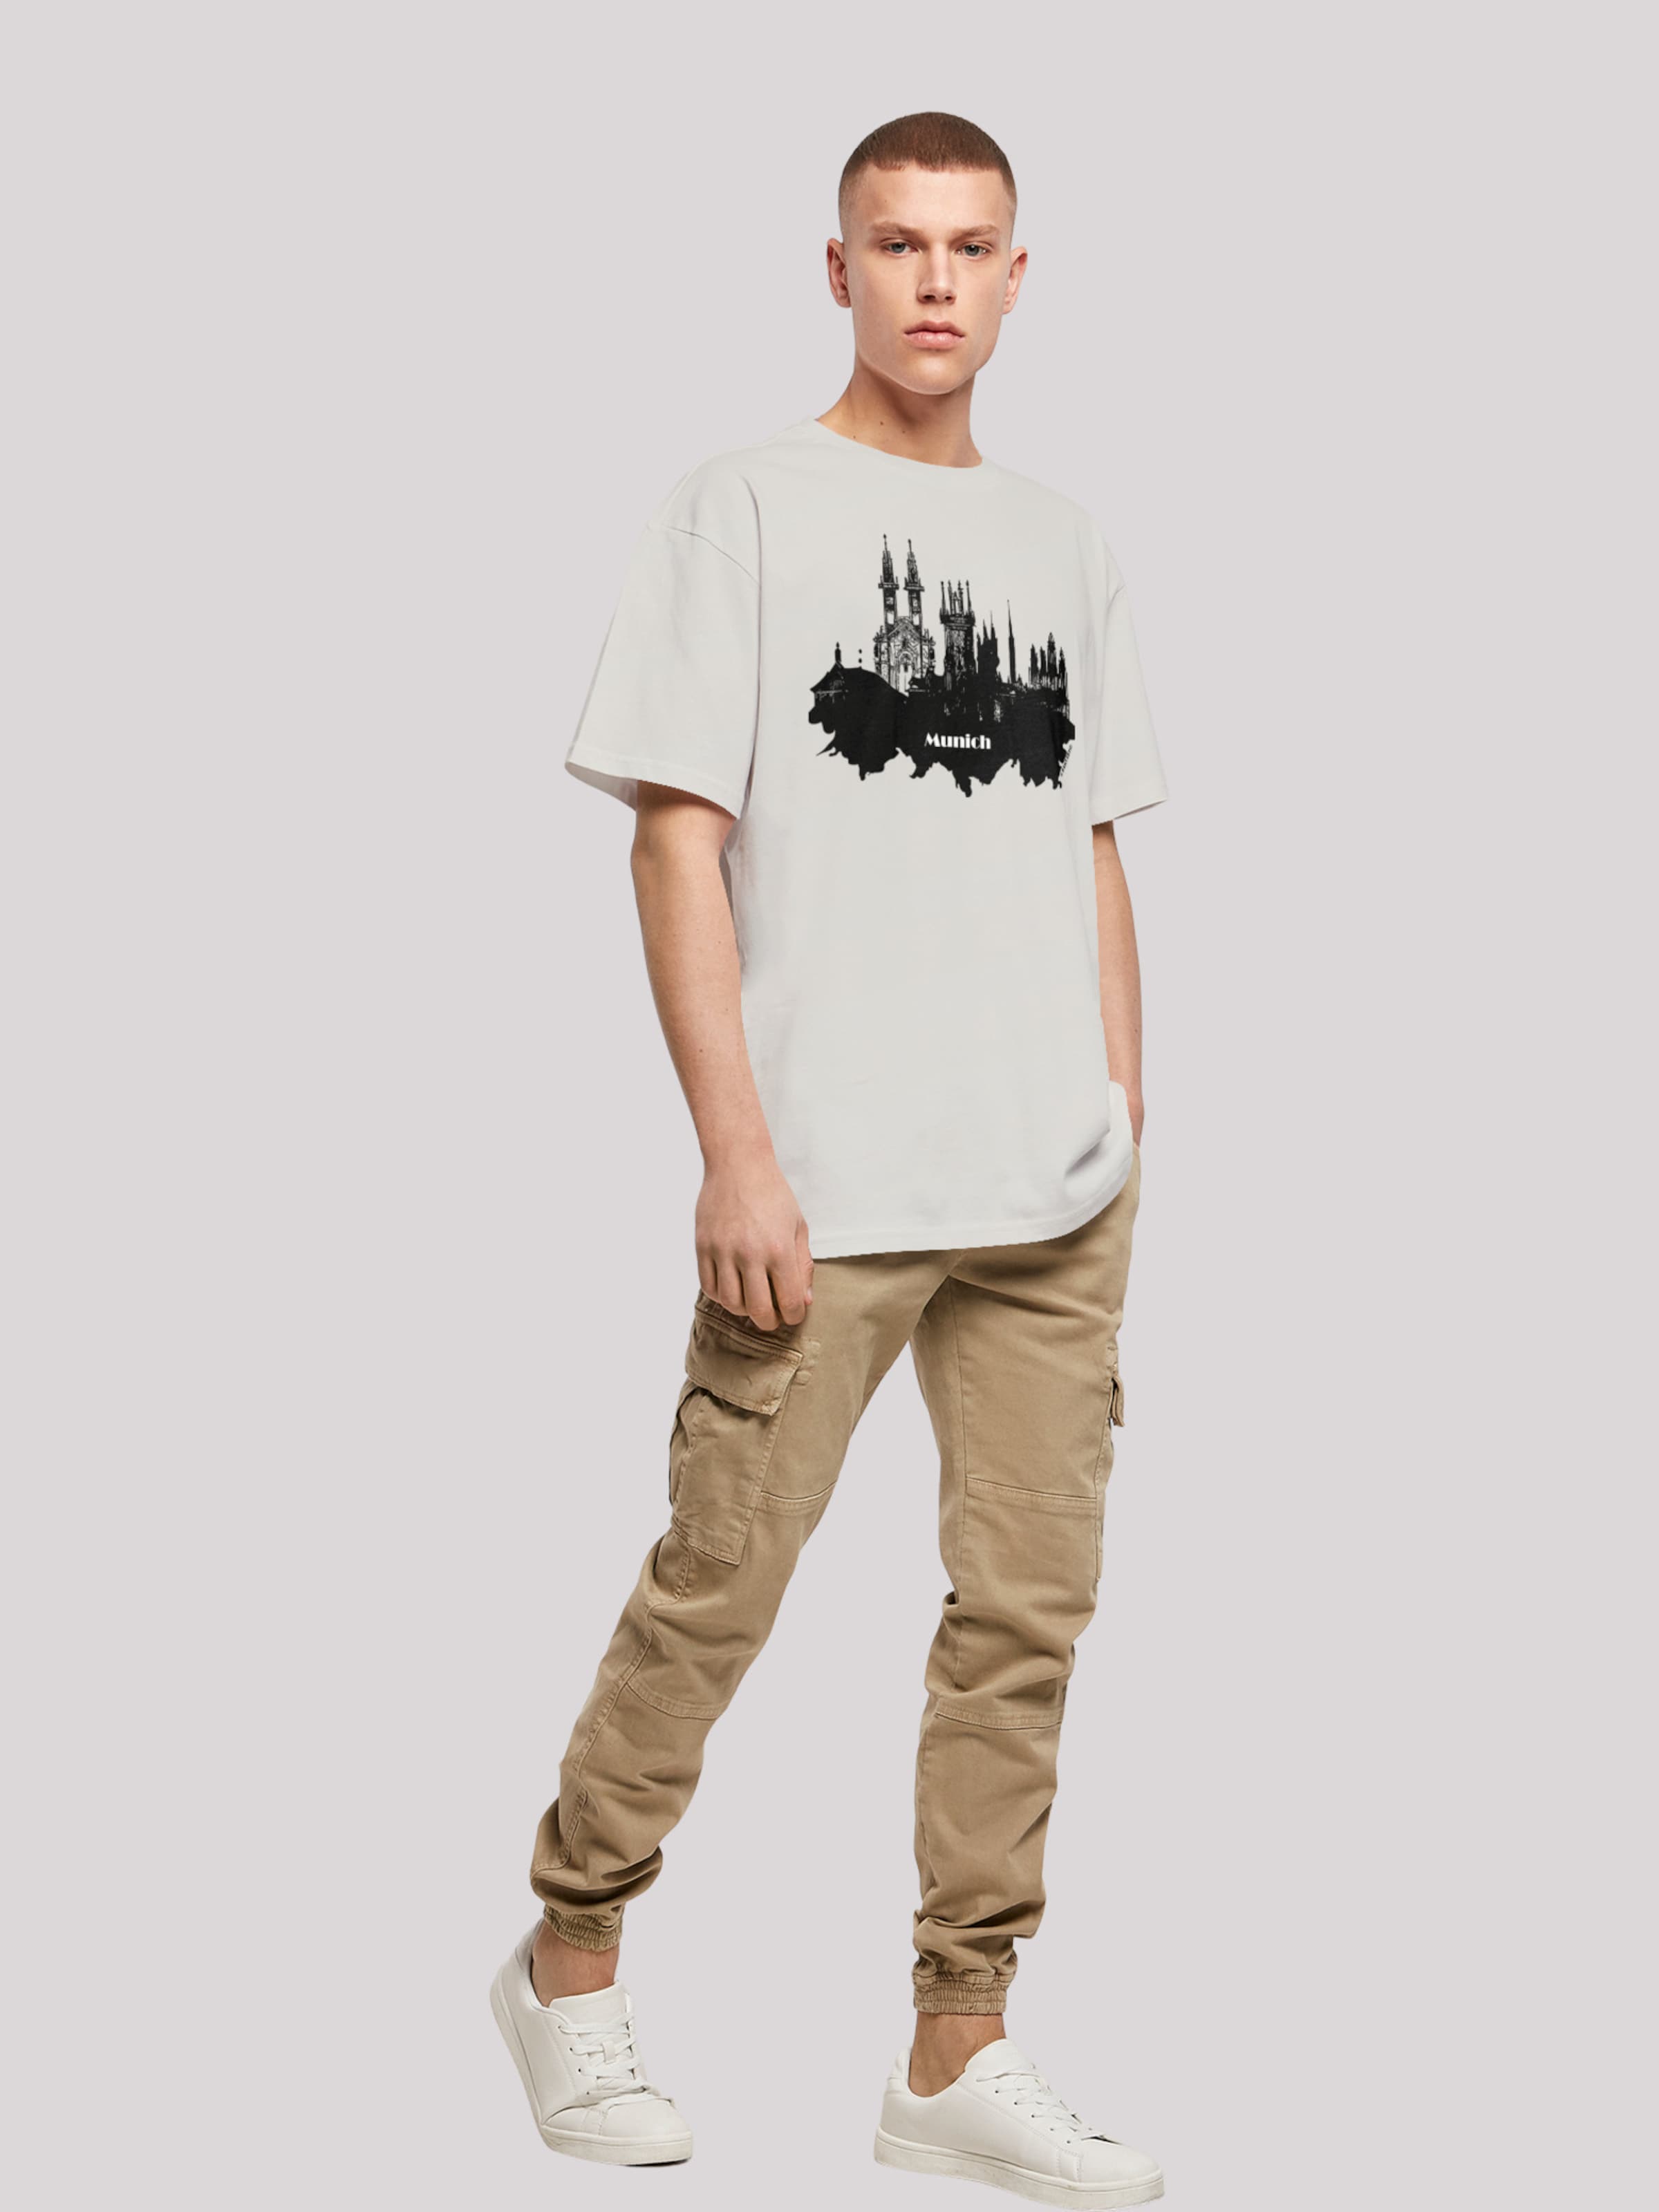 F4NT4STIC Shirt 'Cities Collection - Munich skyline' in Light Grey | ABOUT  YOU